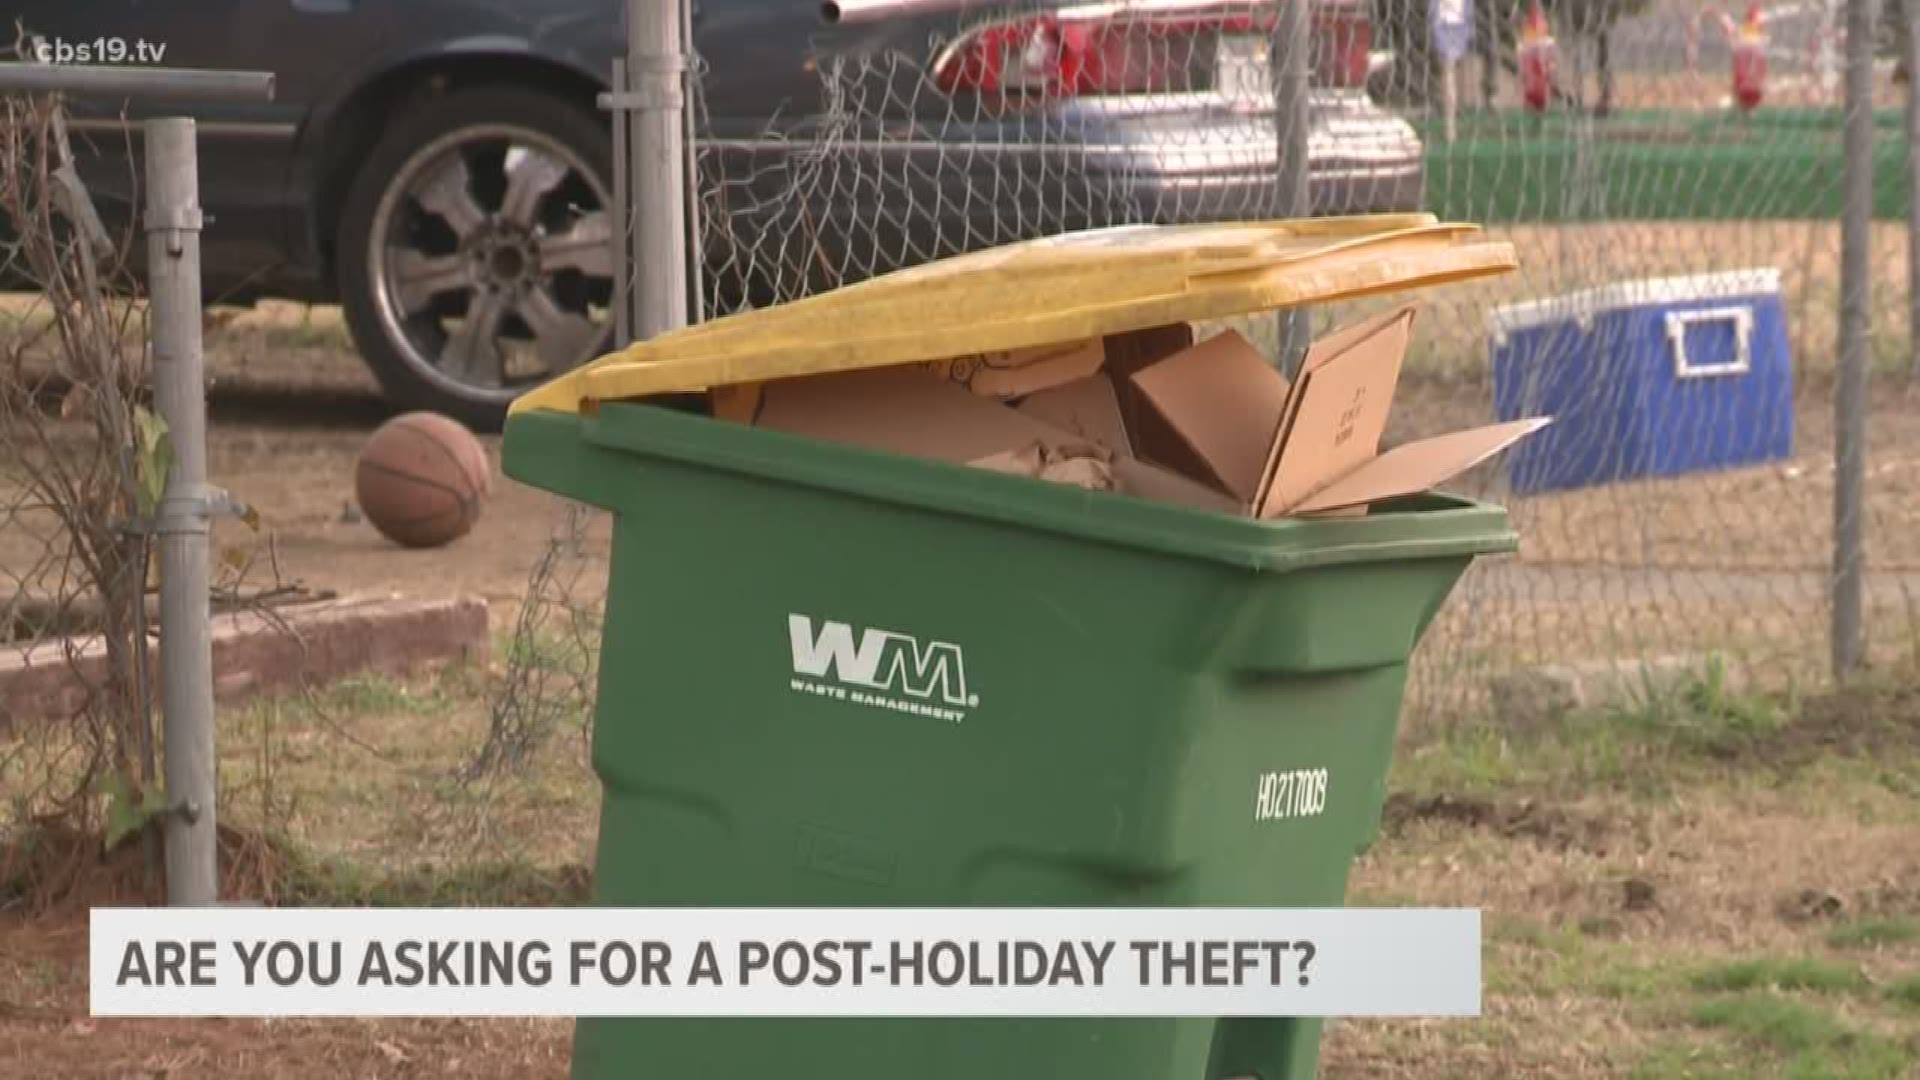 It's no surprise that thefts are high during the gift-giving season. That's something many of us are aware of, but what about after you've opened those gifts? CBS19's LaDyrian Cole shows us how you can avoid making your home a target for crooks.